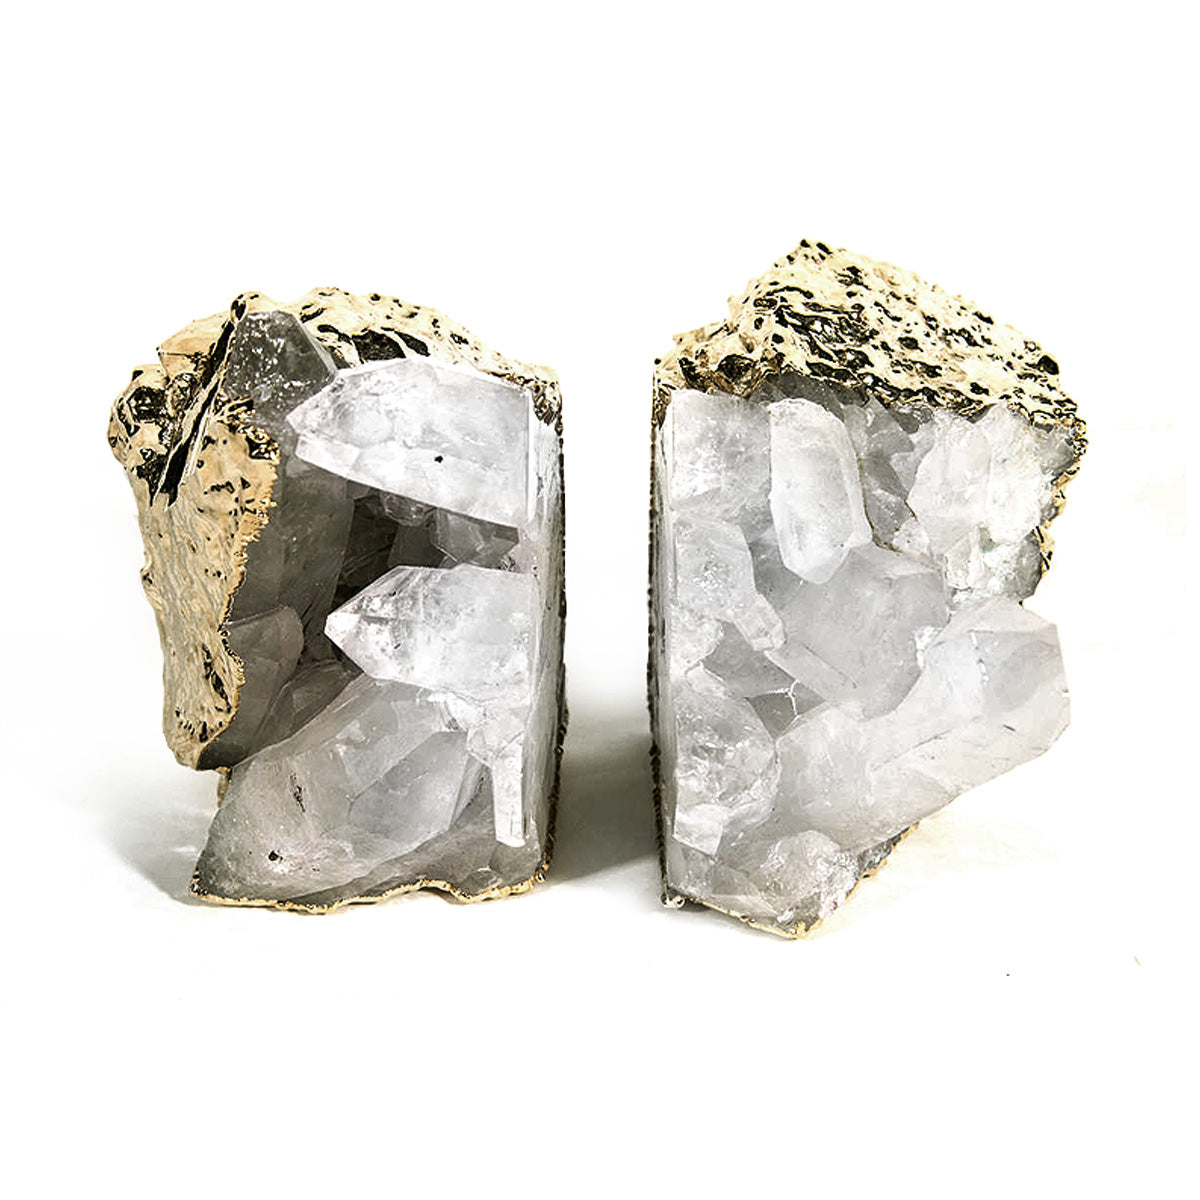 Quartz with Gold Bookends